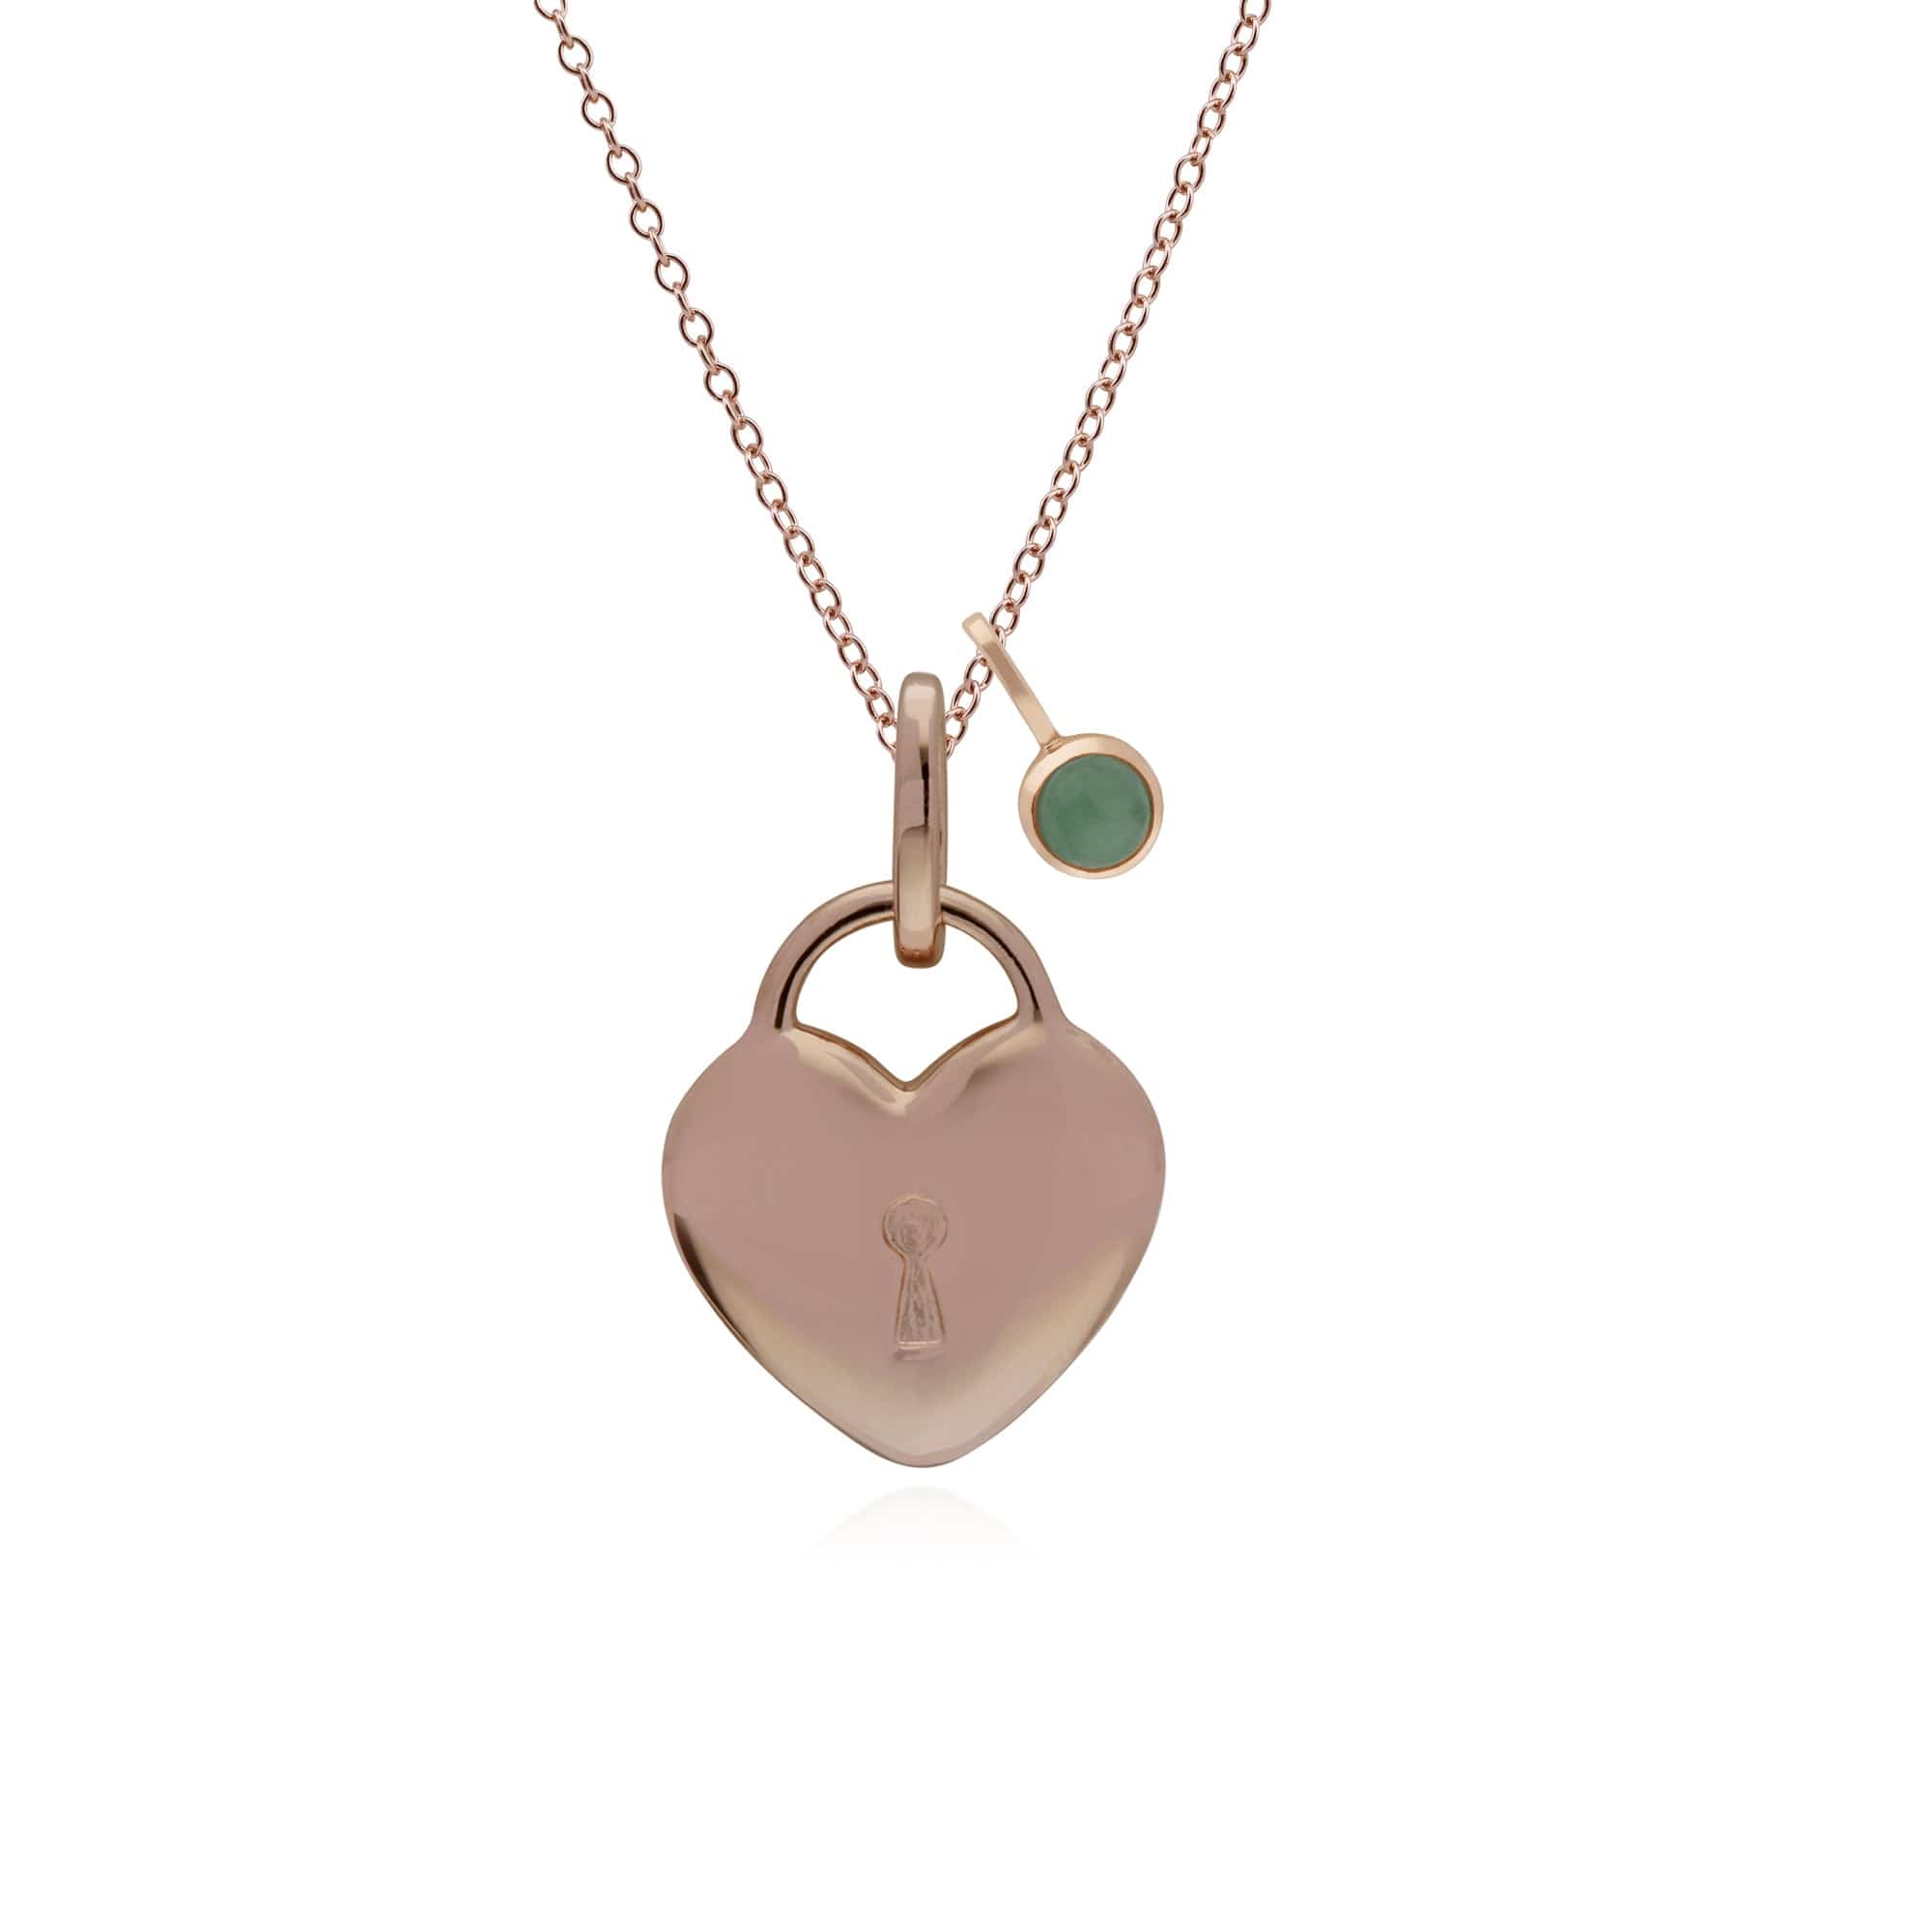 270P025904925-270P026901925 Classic Plain Heart Lock Pendant & Jade Charm in Rose Gold Plated 925 Sterling Silver 1